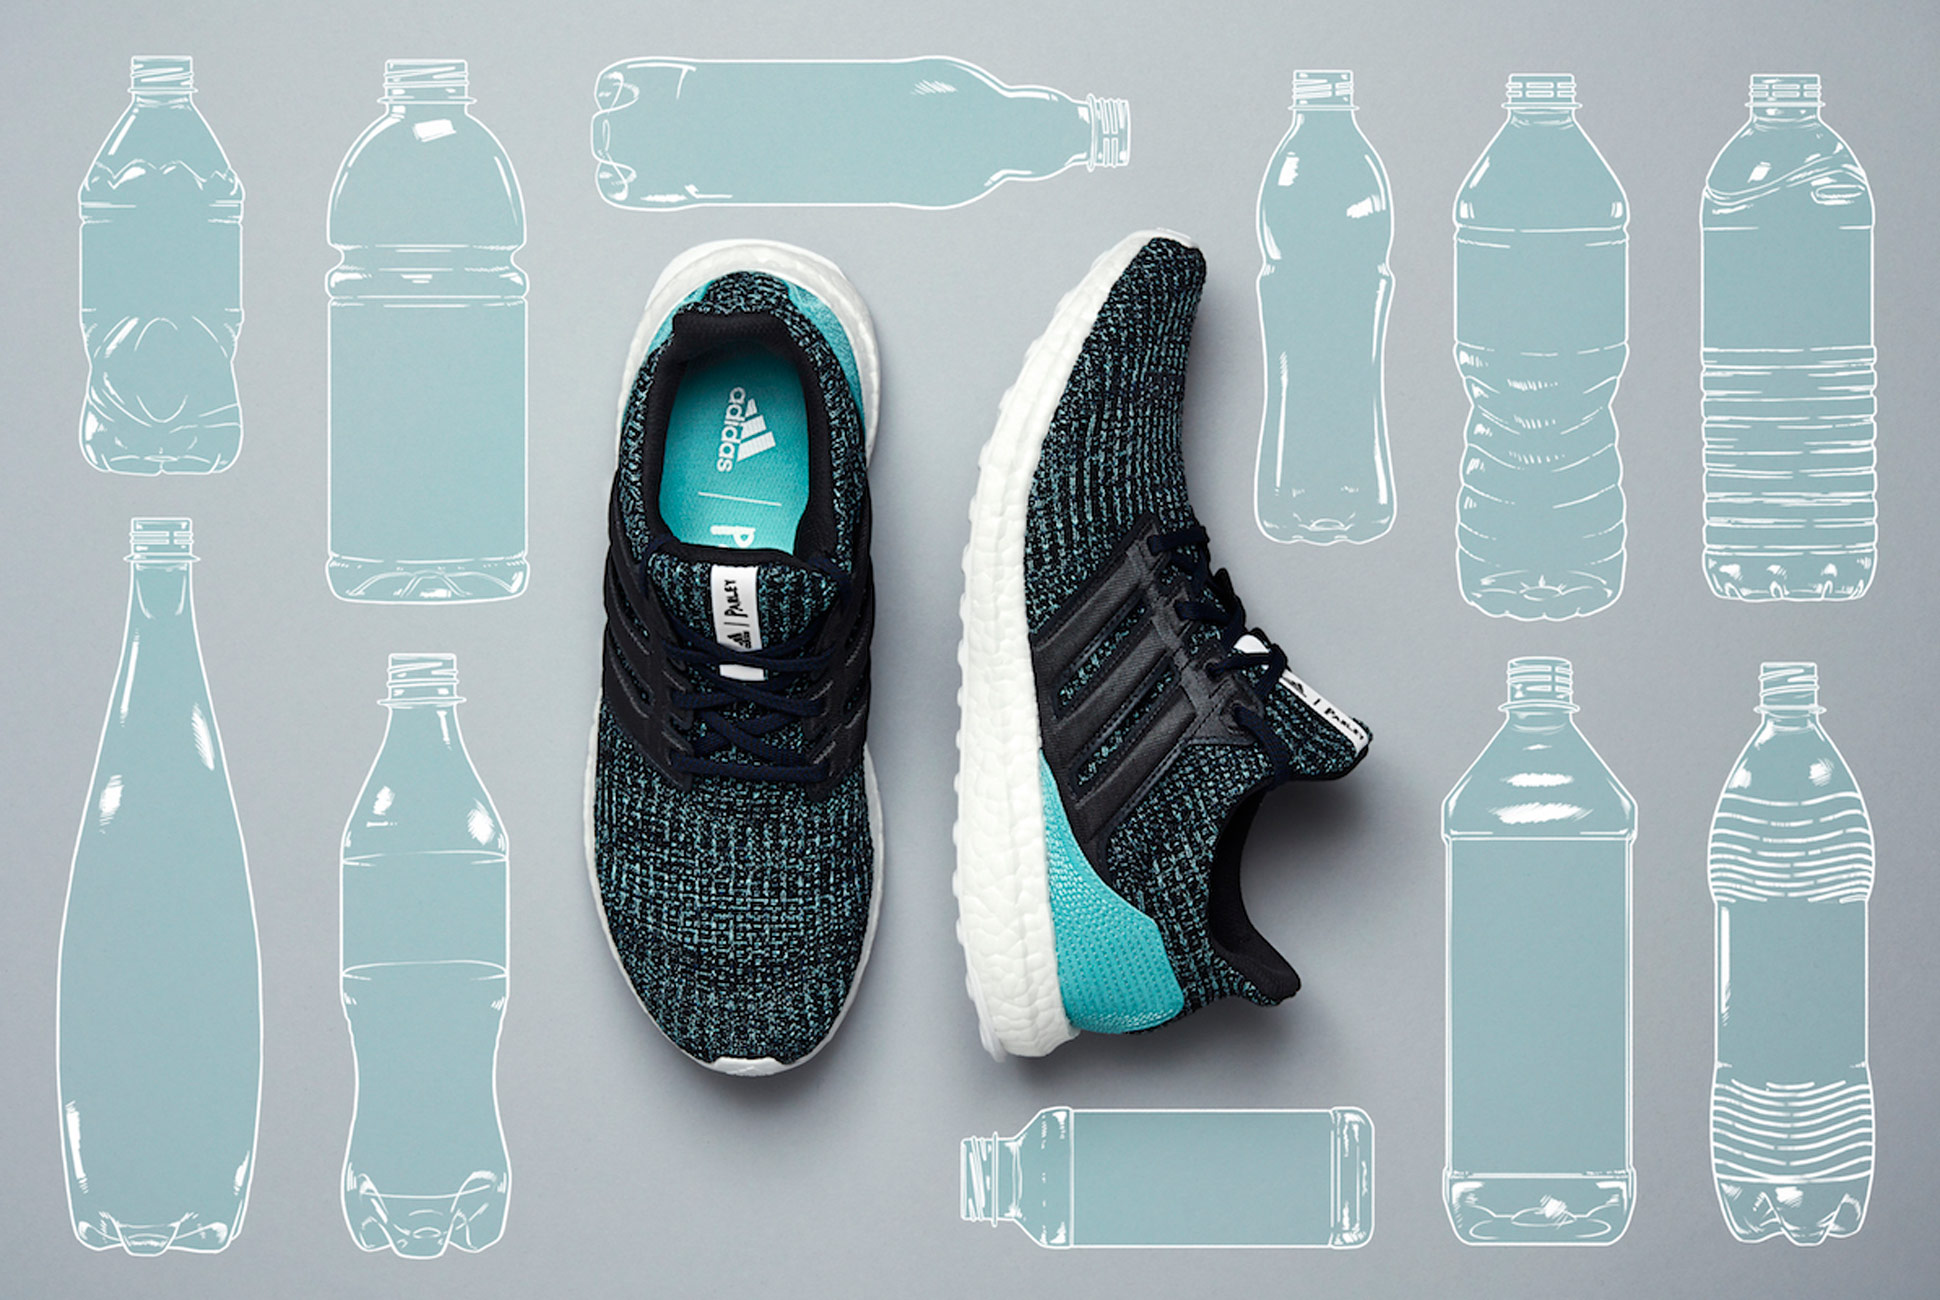 Adidas To Make 11 Million Pairs of Sneakers with Recycled Plastic